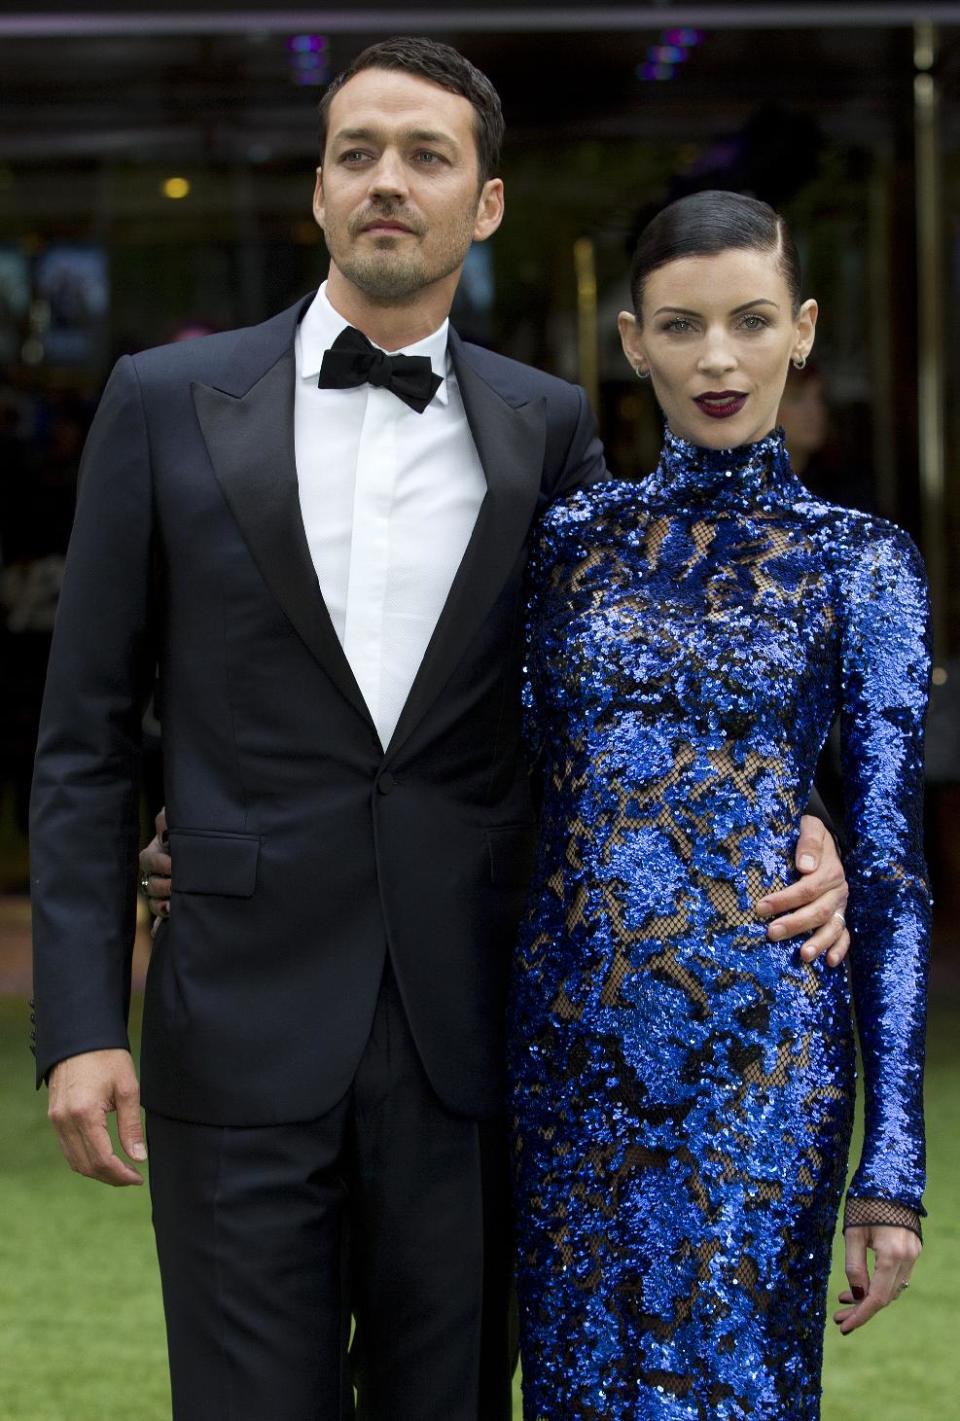 FILE - In this May 14, 2012 file photo, actress Liberty Ross with director Rupert Sanders pose for the media at the World Premiere of the film, "Snow White and the Huntsman," at a cinema in central London. Ross filed for divorce on Friday, Jan. 28, 2013 in Los Angeles, roughly five months after it was revealed that Sanders had engaged in a brief affair with actress Kristen Stewart. (AP Photo/Alastair Grant, File)